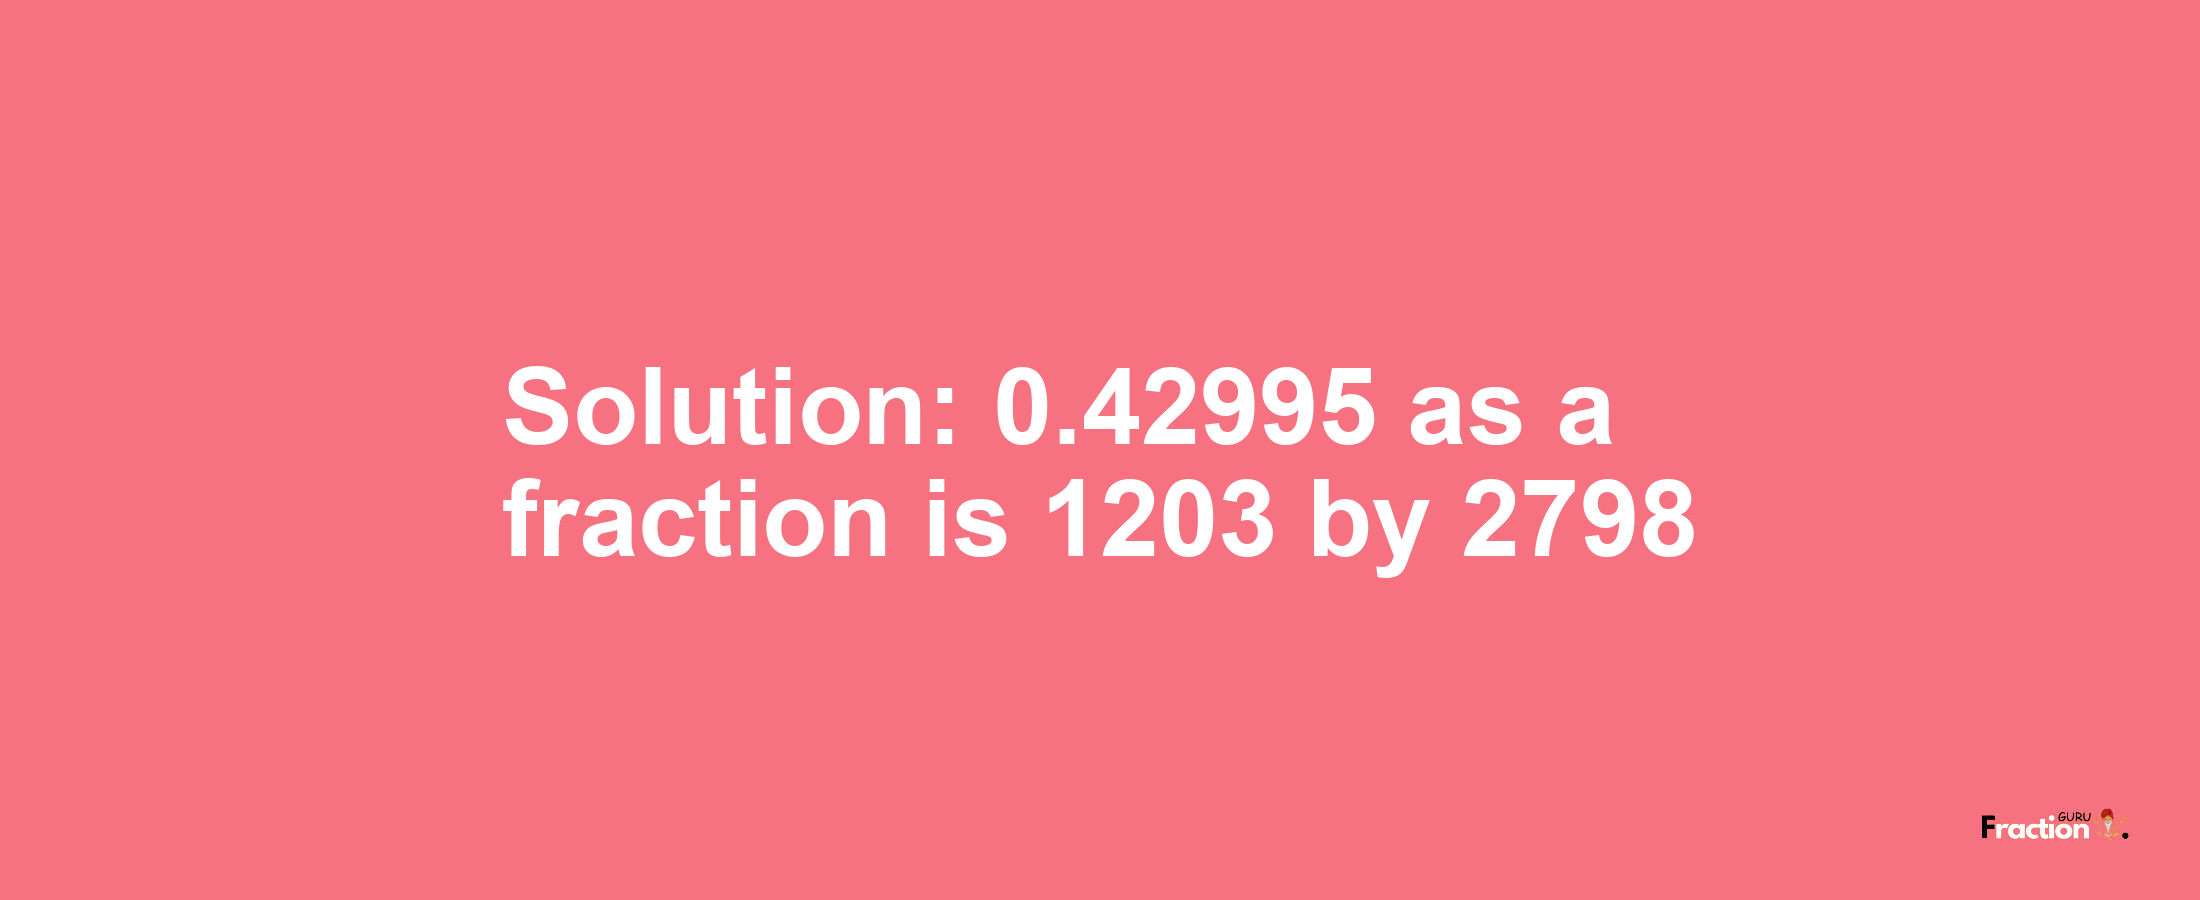 Solution:0.42995 as a fraction is 1203/2798